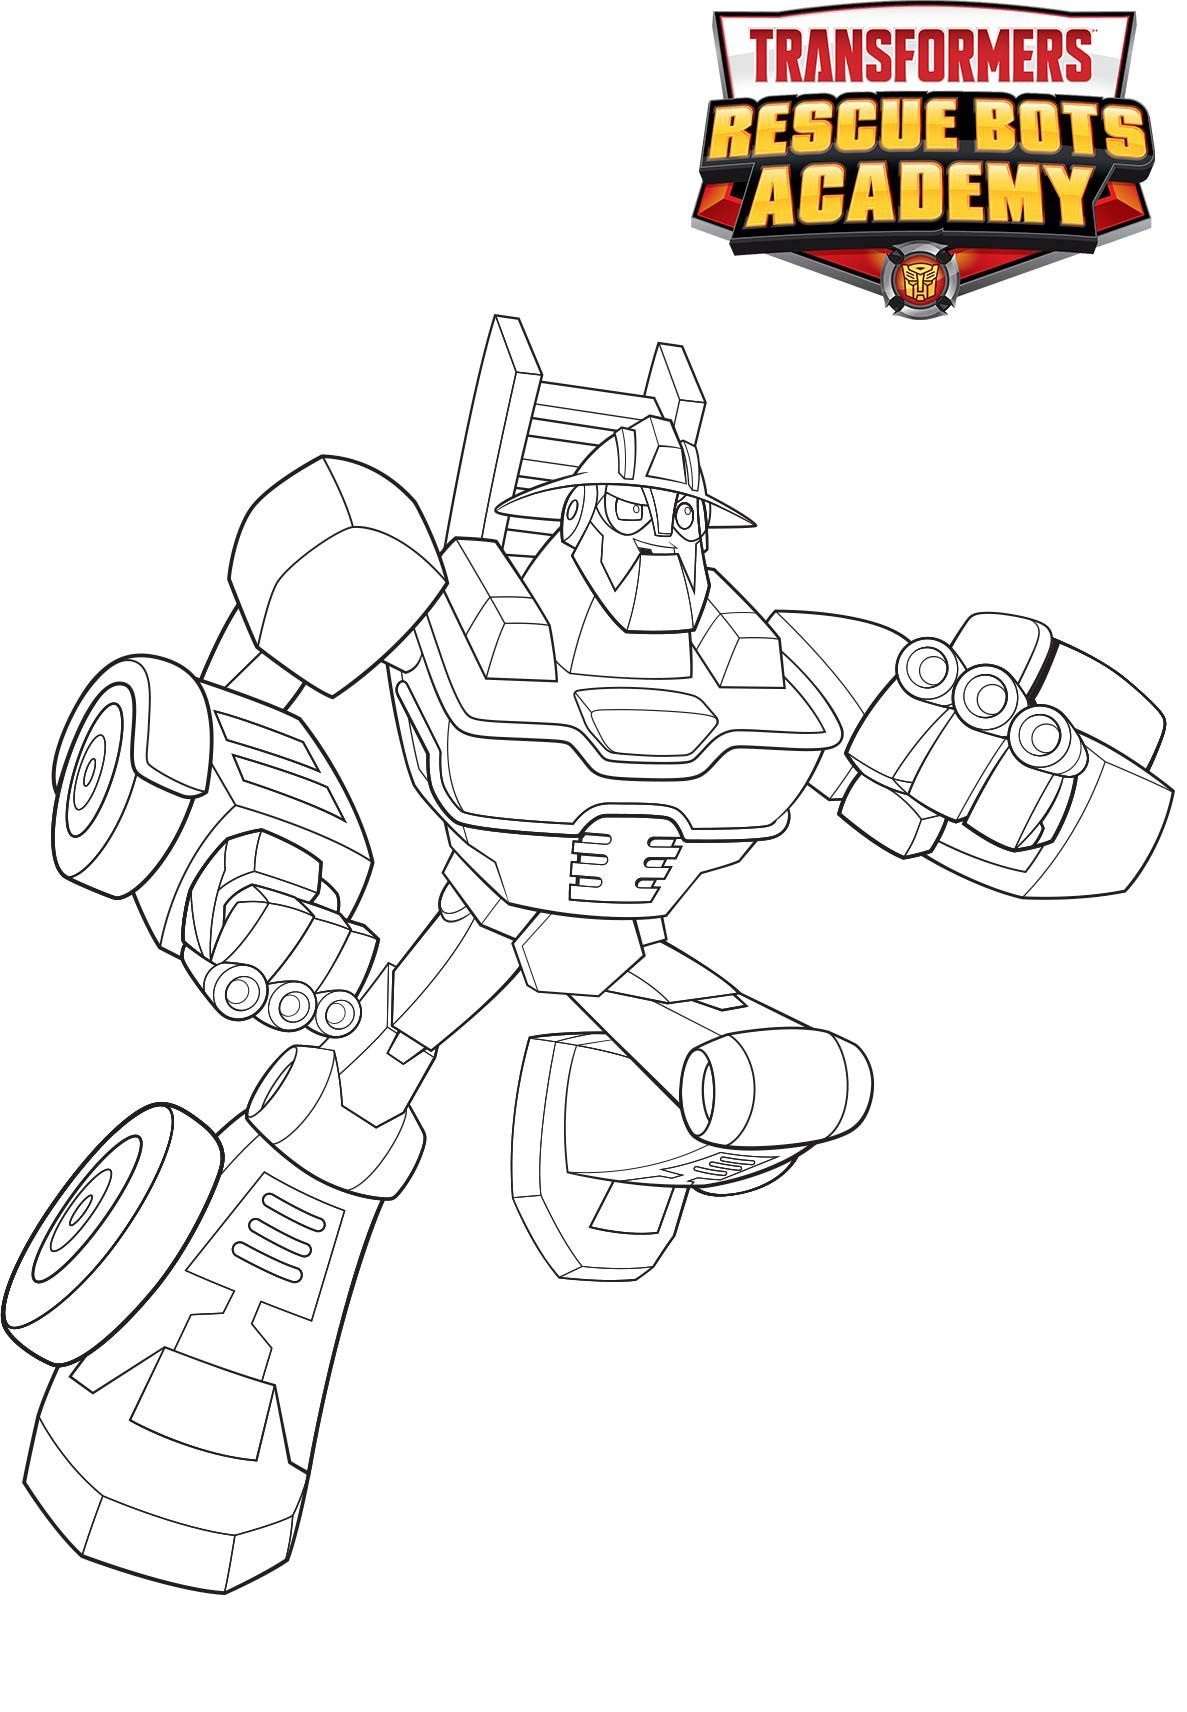 Action Heatwave Coloring Page - Free Printable Coloring Pages for Kids